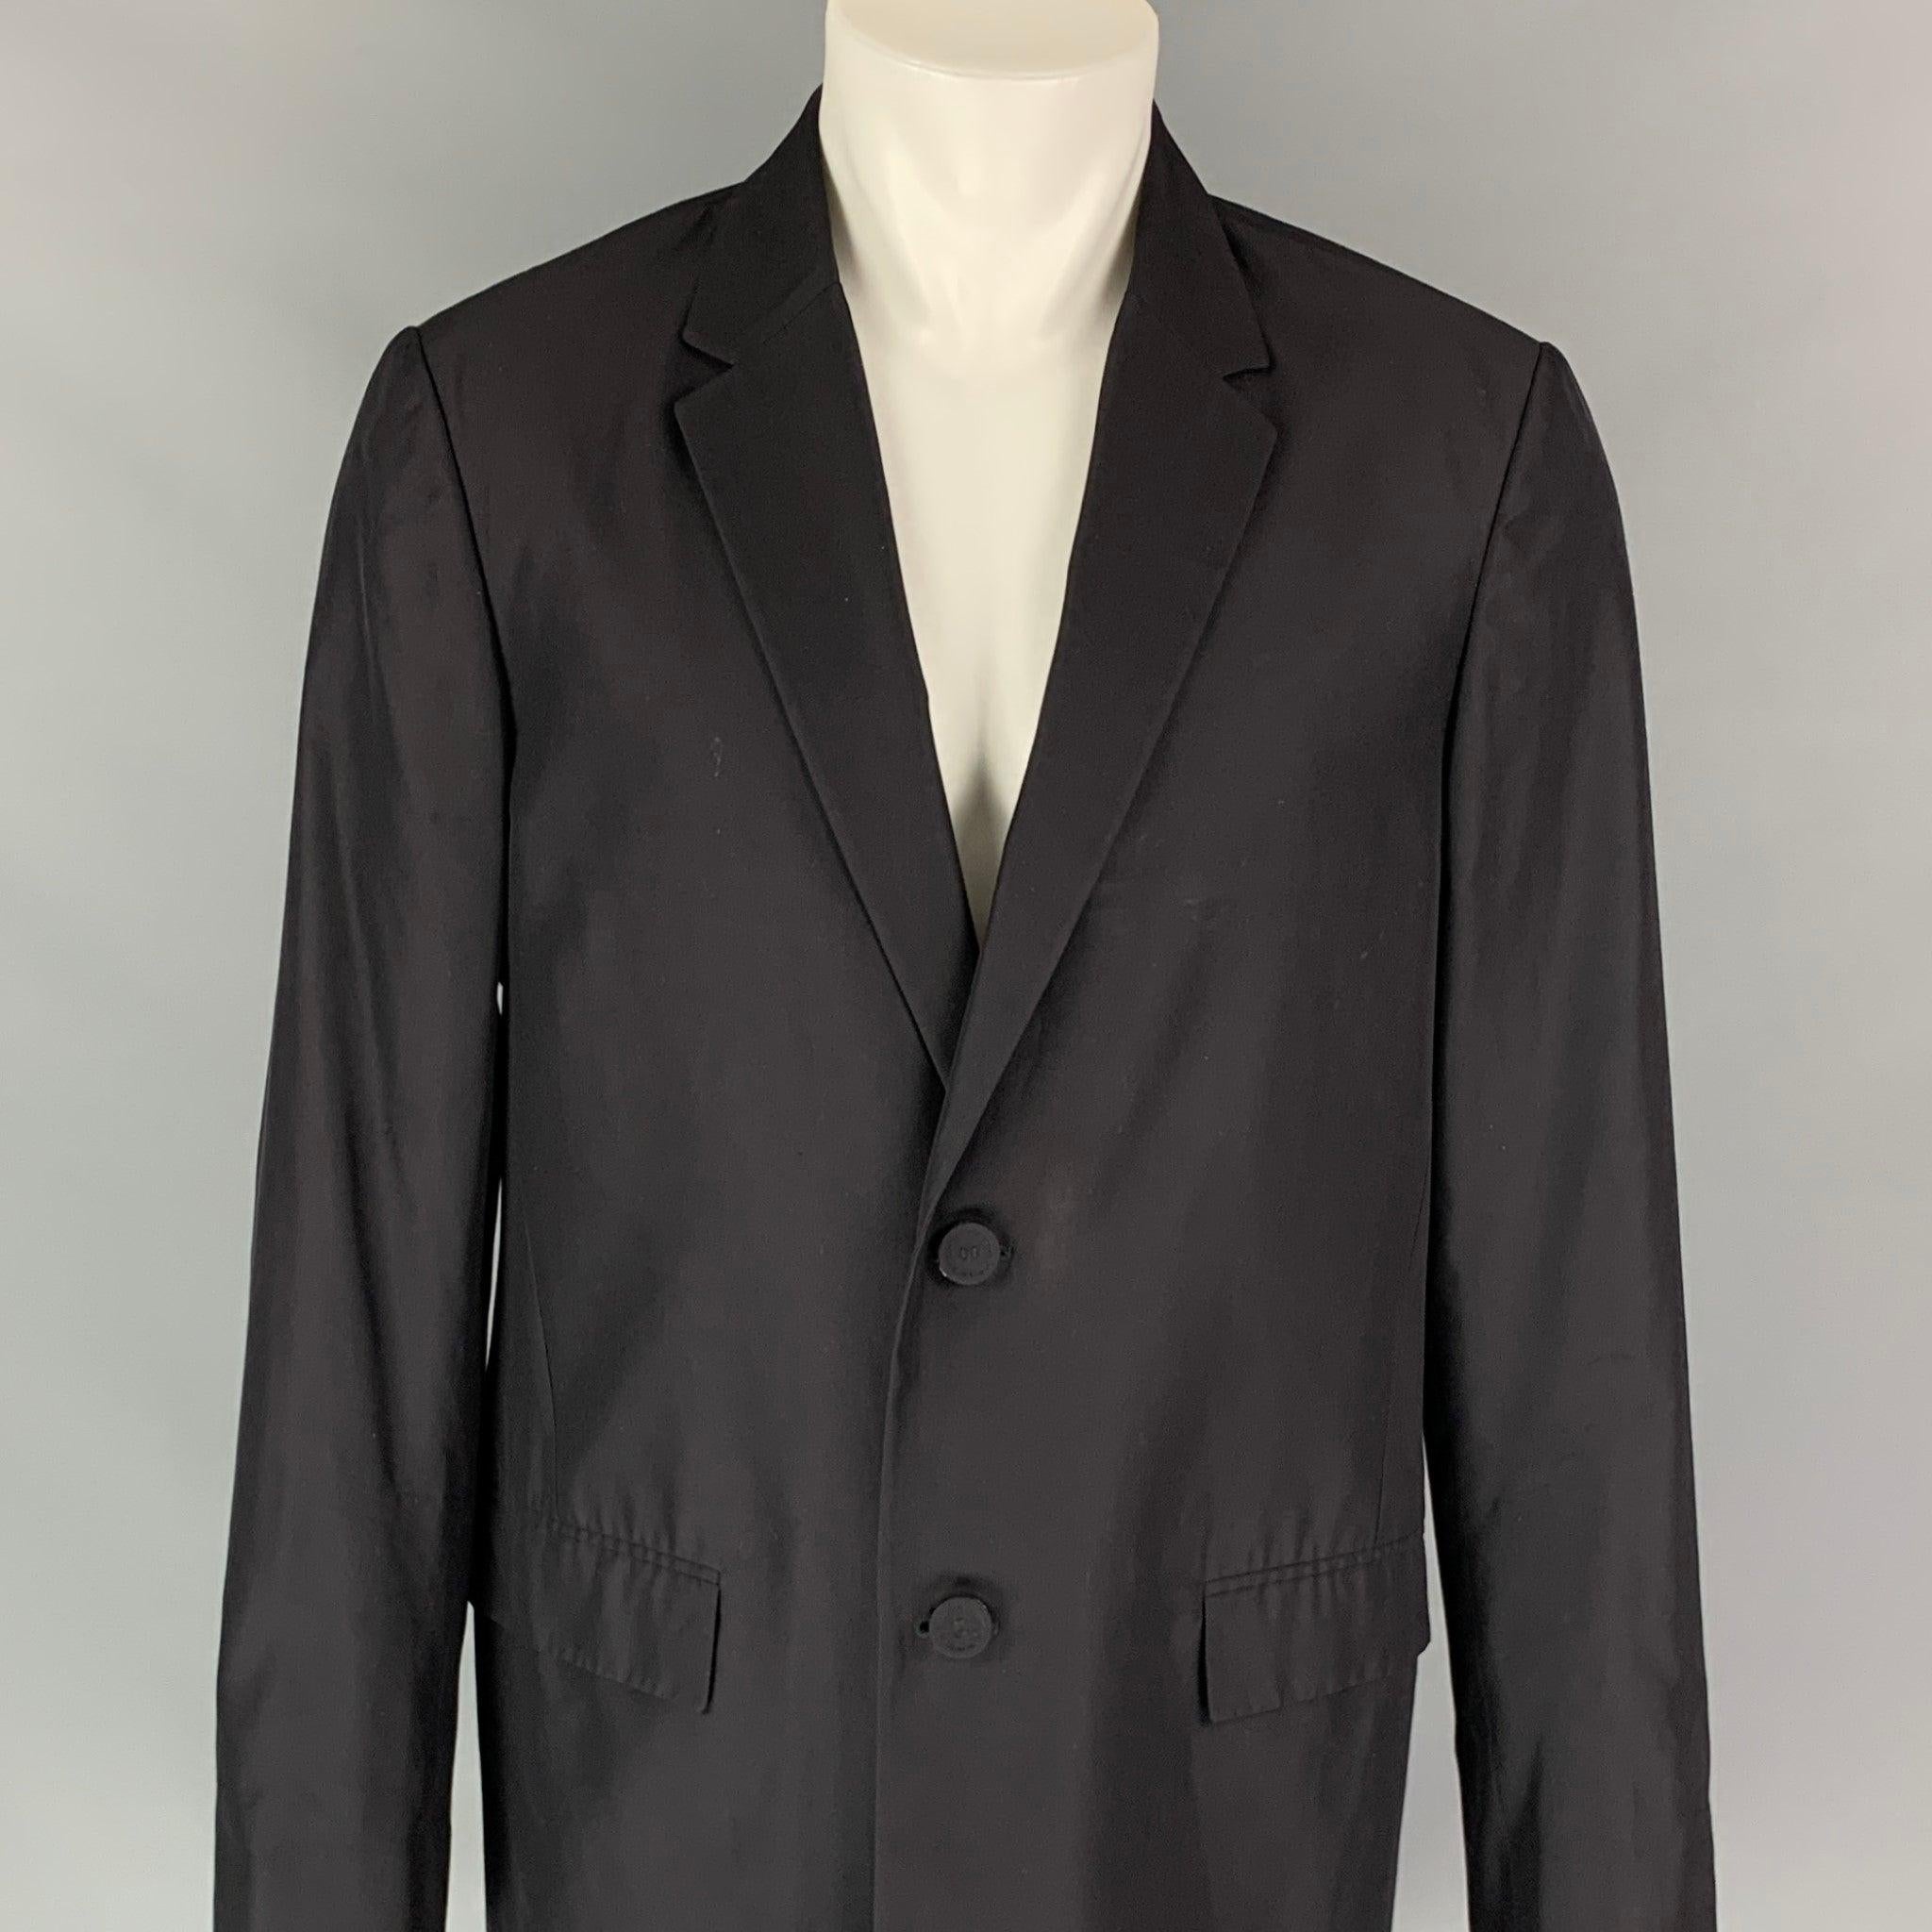 CALVIN KLEIN COLLECTION coat comes in a black silk featuring a notch lapel, lightweight, flap pockets, and a two button closure. Made in Italy.
Very Good Pre-Owned Condition. 

Marked:  48/38 

Measurements: 
 
Shoulder: 18 inches Chest: 42 inches